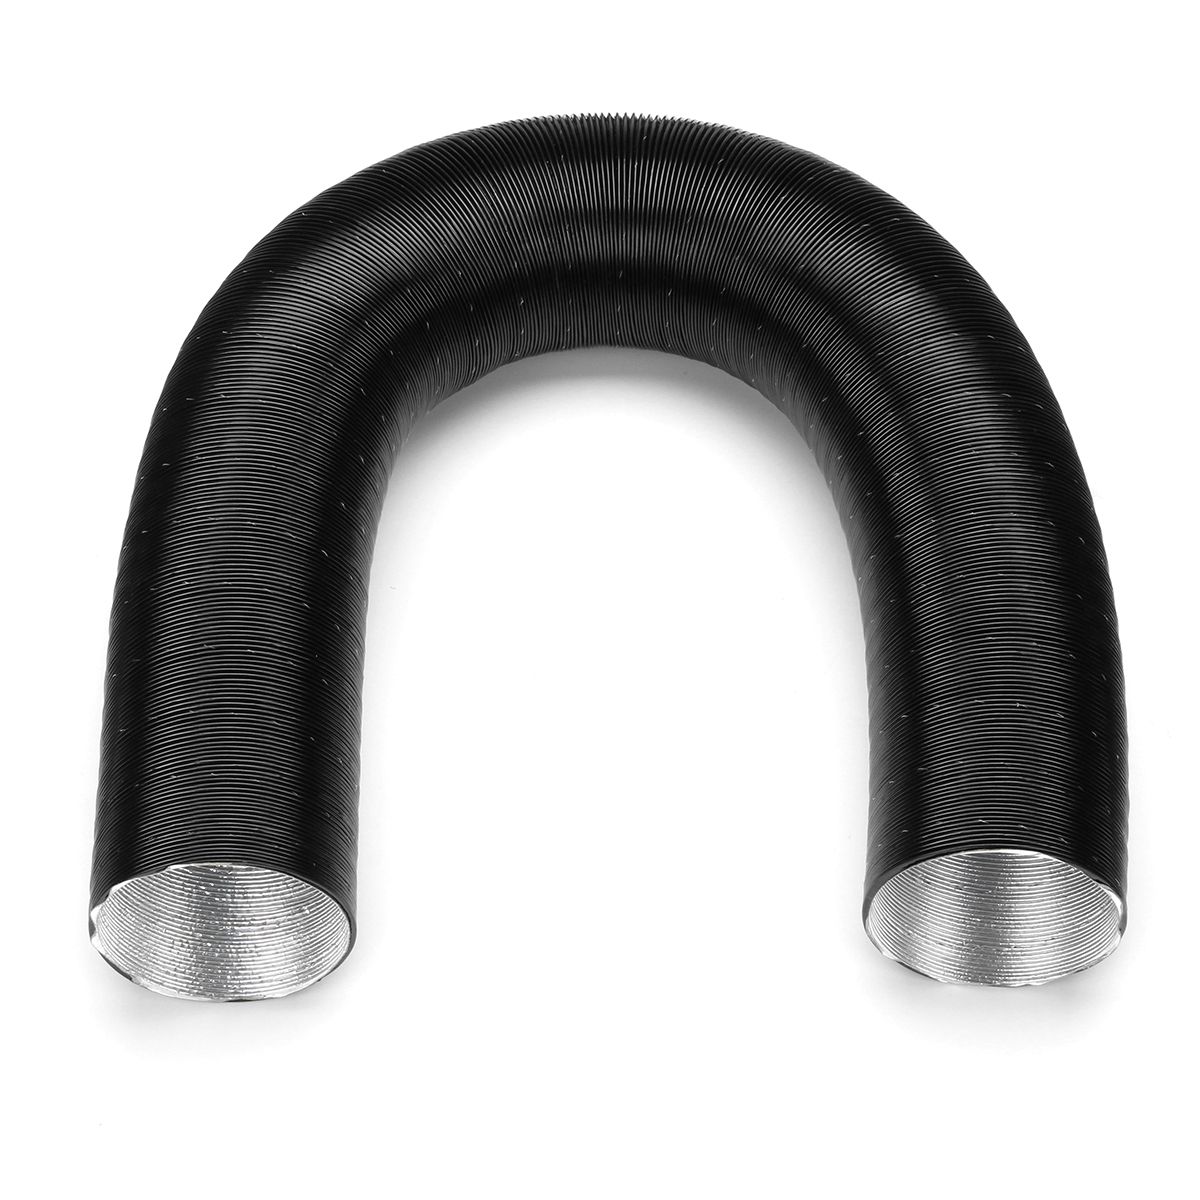 60mm-Heater-Duct-Pipe-Air-Outlet-Vent-Hose-Clip-For-Eberspacher-Diesel-Heater-1722474